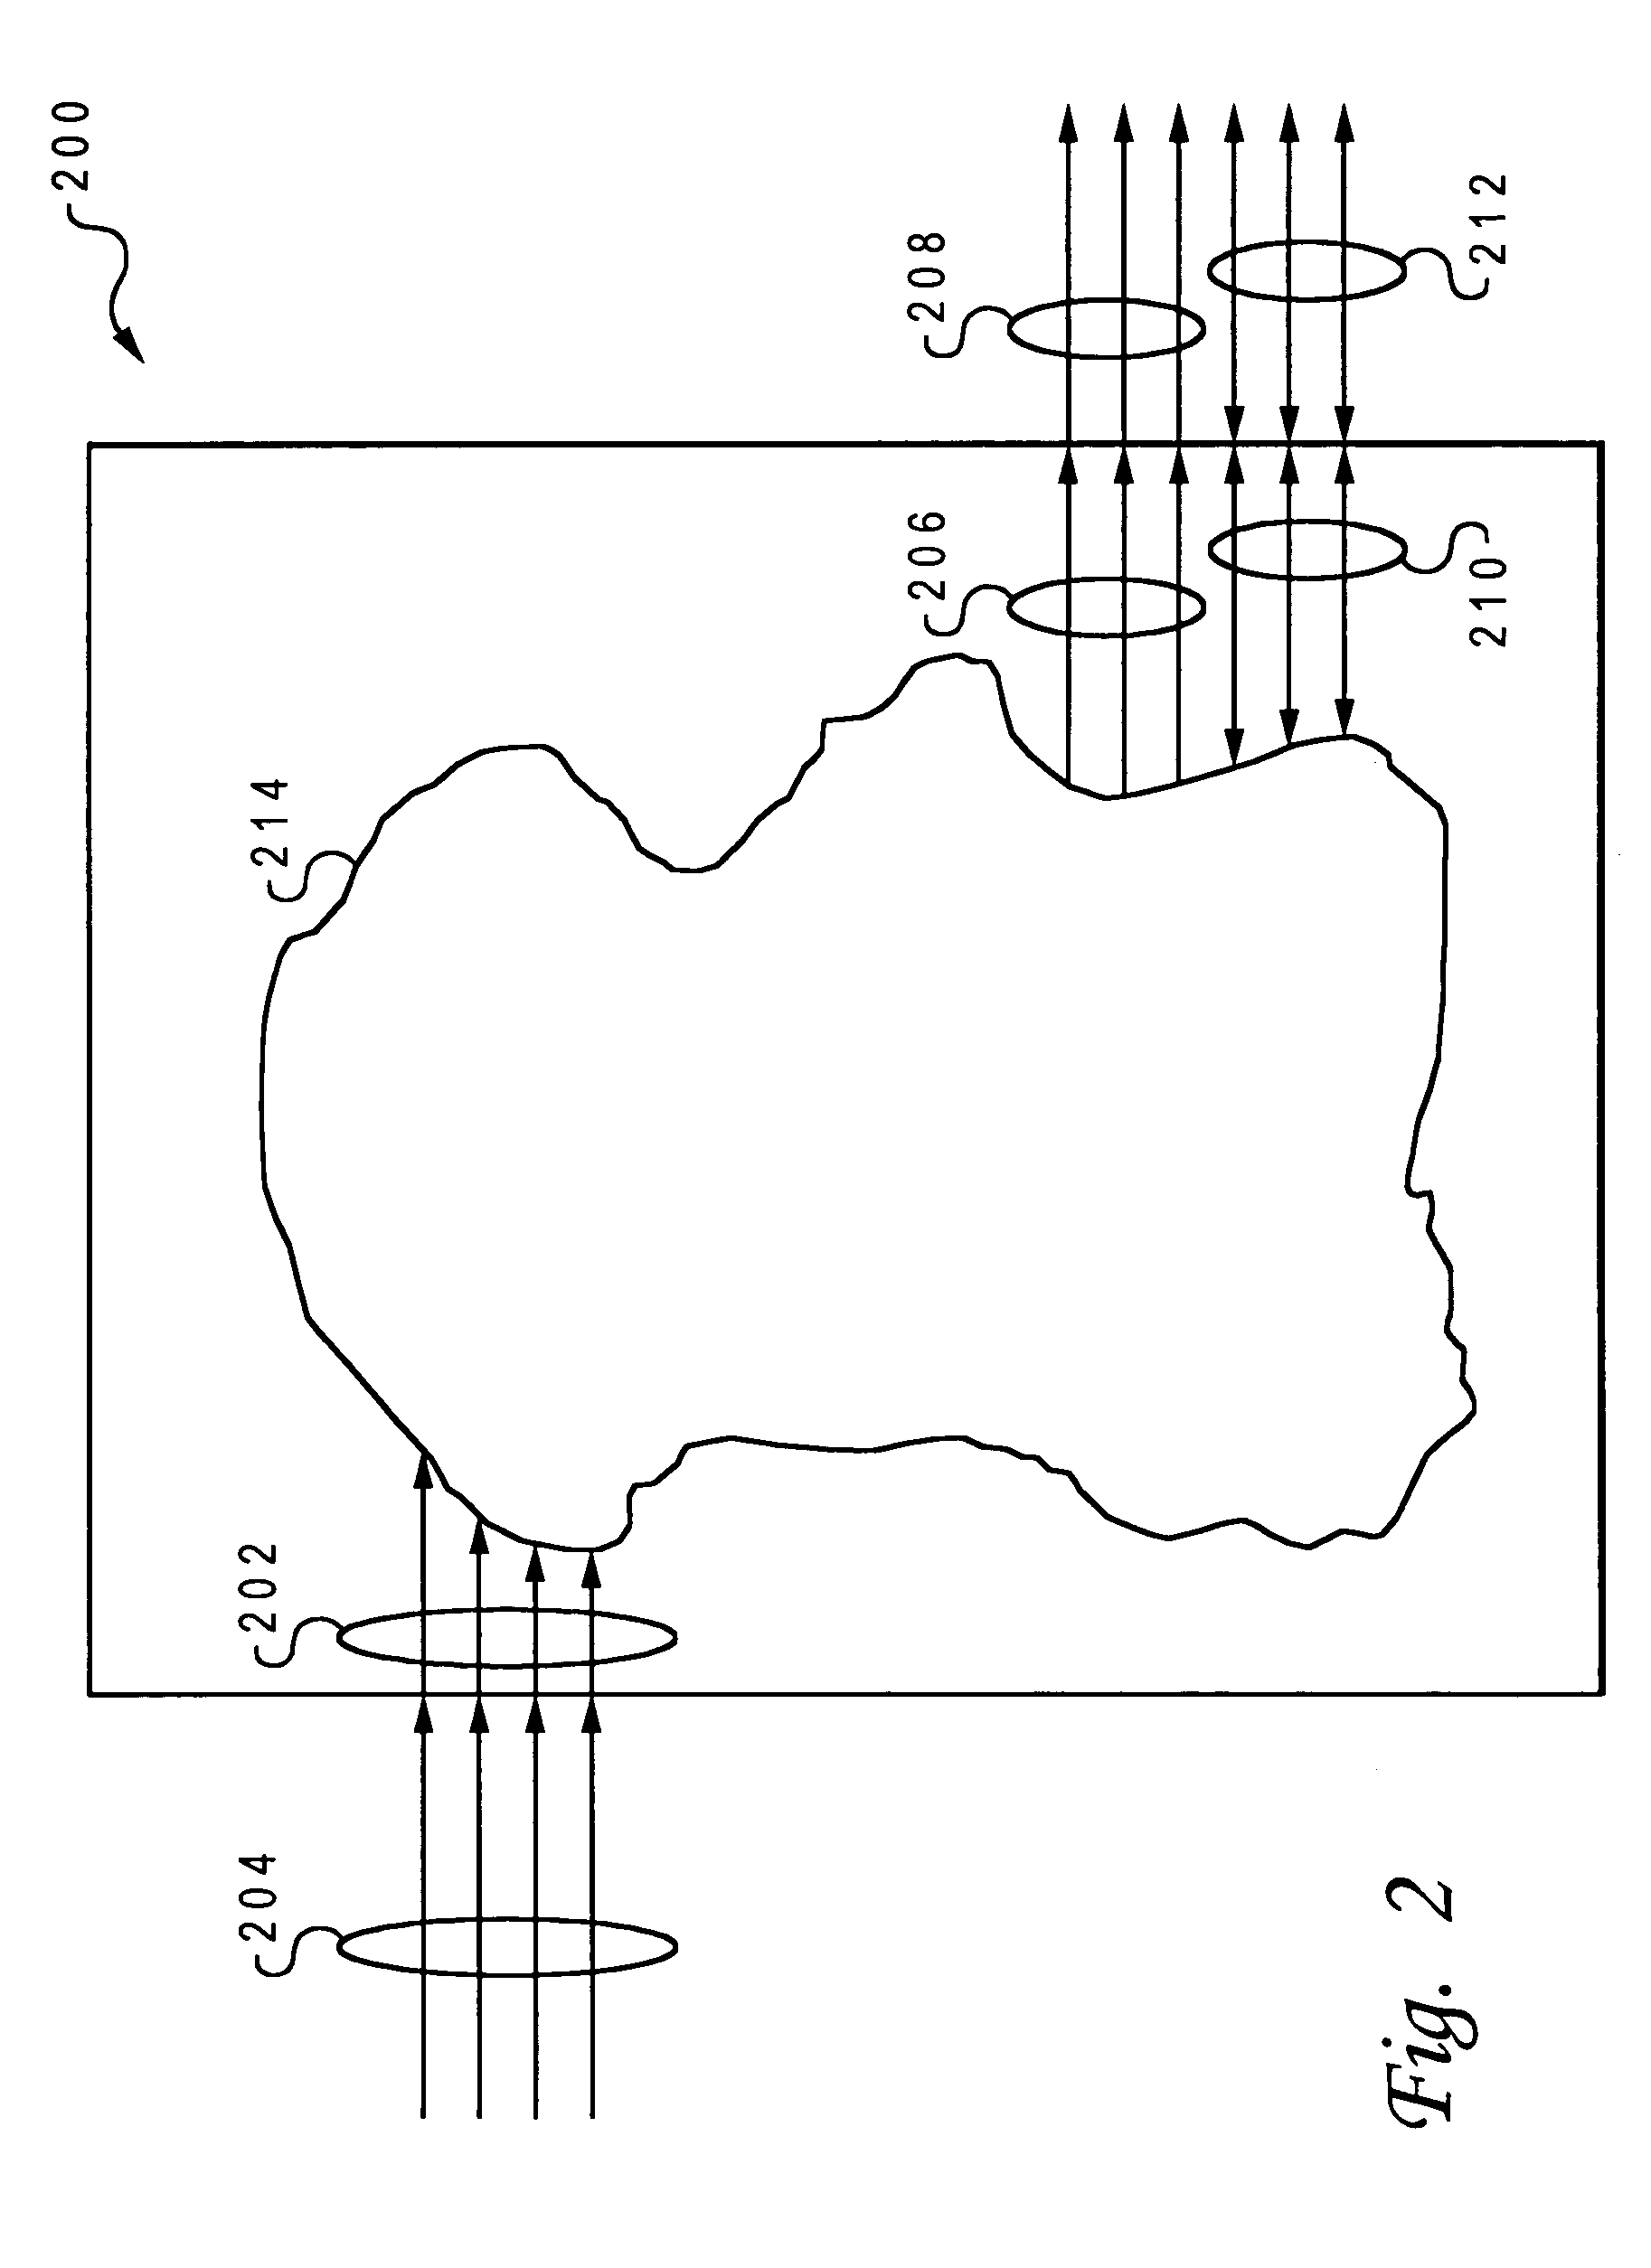 Method, system and program product providing a configuration specification language supporting arbitrary mapping functions for configuration constructs